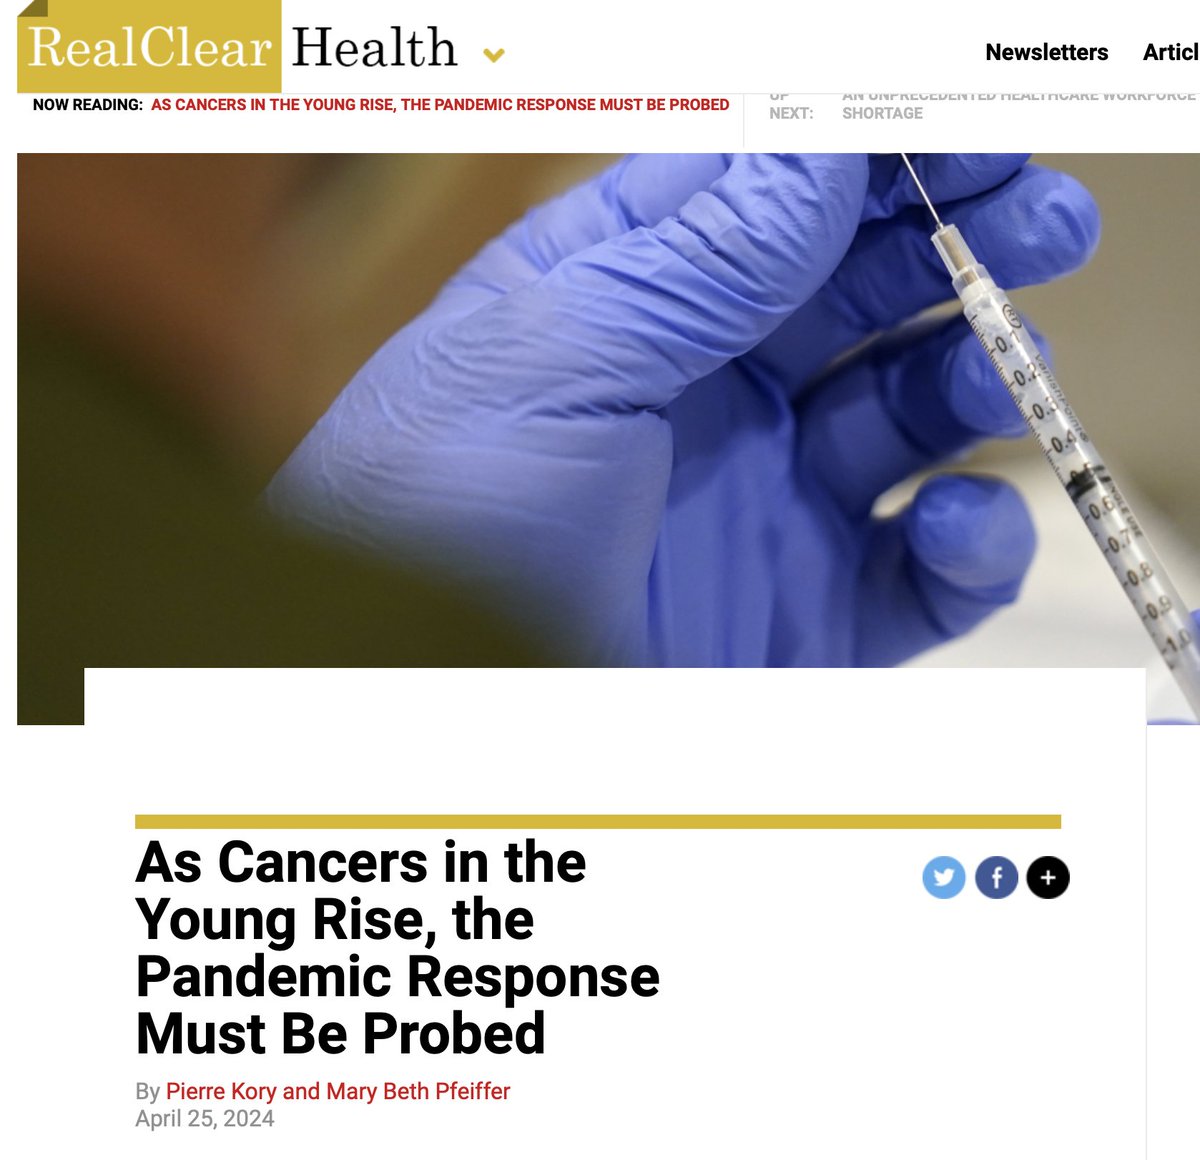 We have over 3500 peer-reviewed studies reporting adverse events after the C*VID shots, some now point to rising cancer, particularly in the 15-44 year old age group. First do no harm. Link to article by @marybethpf and @PierreKory in comments.